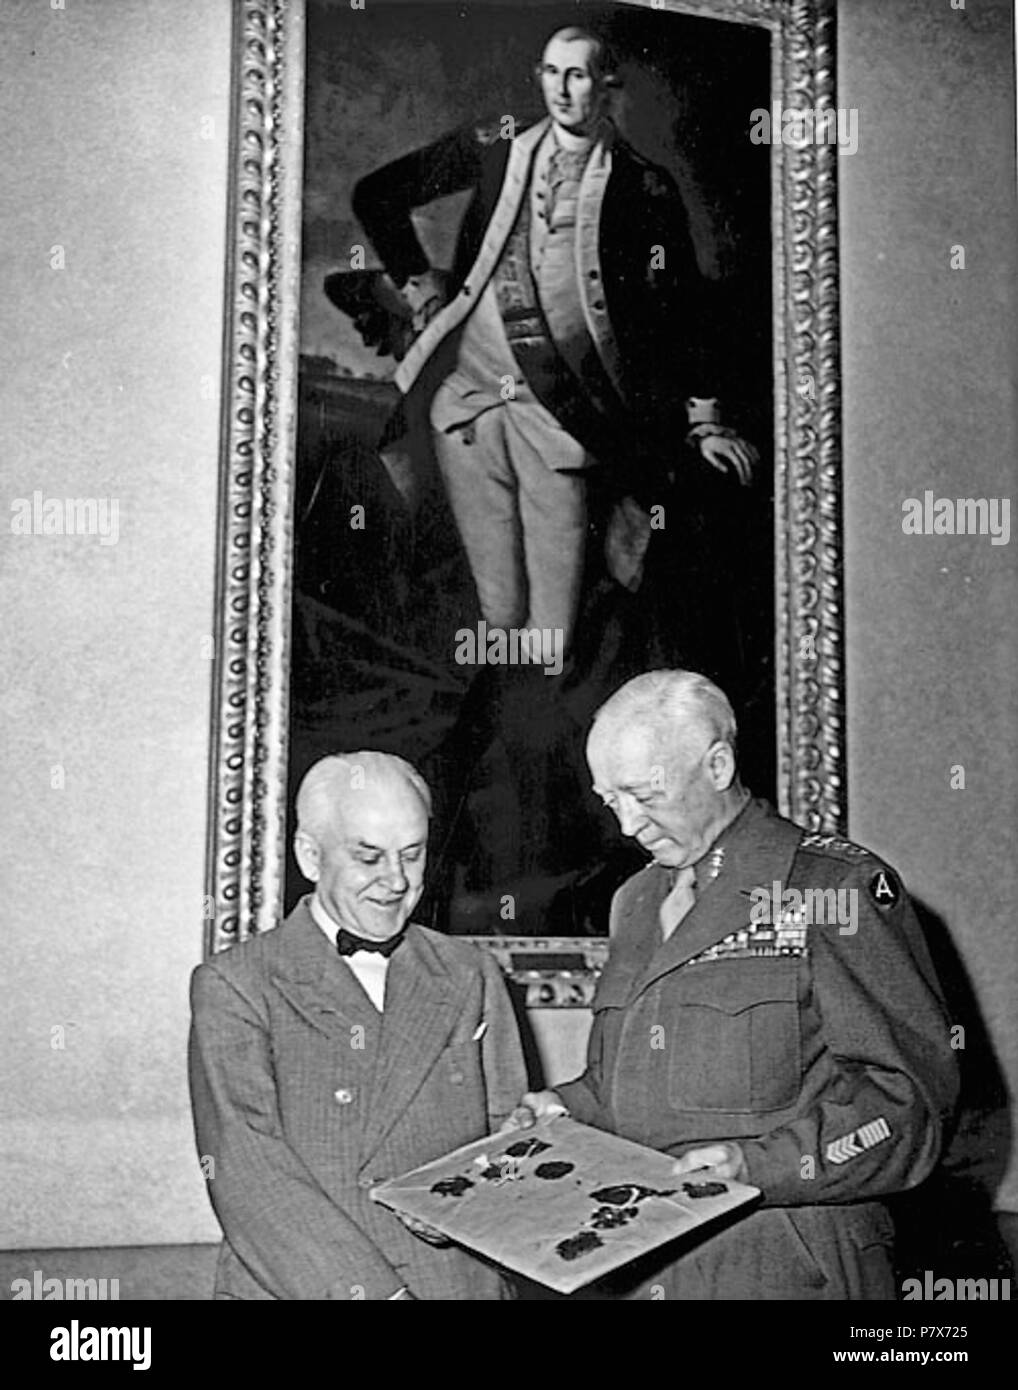 English: Gen. George S. Patton Jr., right, presenting Huntington trustee Robert Millikan with an original 1935 typescript of the Nuremberg Laws signed by Adolf Hitler, on June 11, 1945. During the final days of World War II, as American soldiers were returning home from Germany with helmets, swastika-inscribed flags and other Nazi memorabilia, Gen. George Patton was packing up his own sourvenirs, including four pages of these documents signed by Adolf Hitler that set up the legal framework for the Nazis to kill six million Jews . 11 June 1945 169 Gen. George S. Patton presented the Nuremberg L Stock Photo